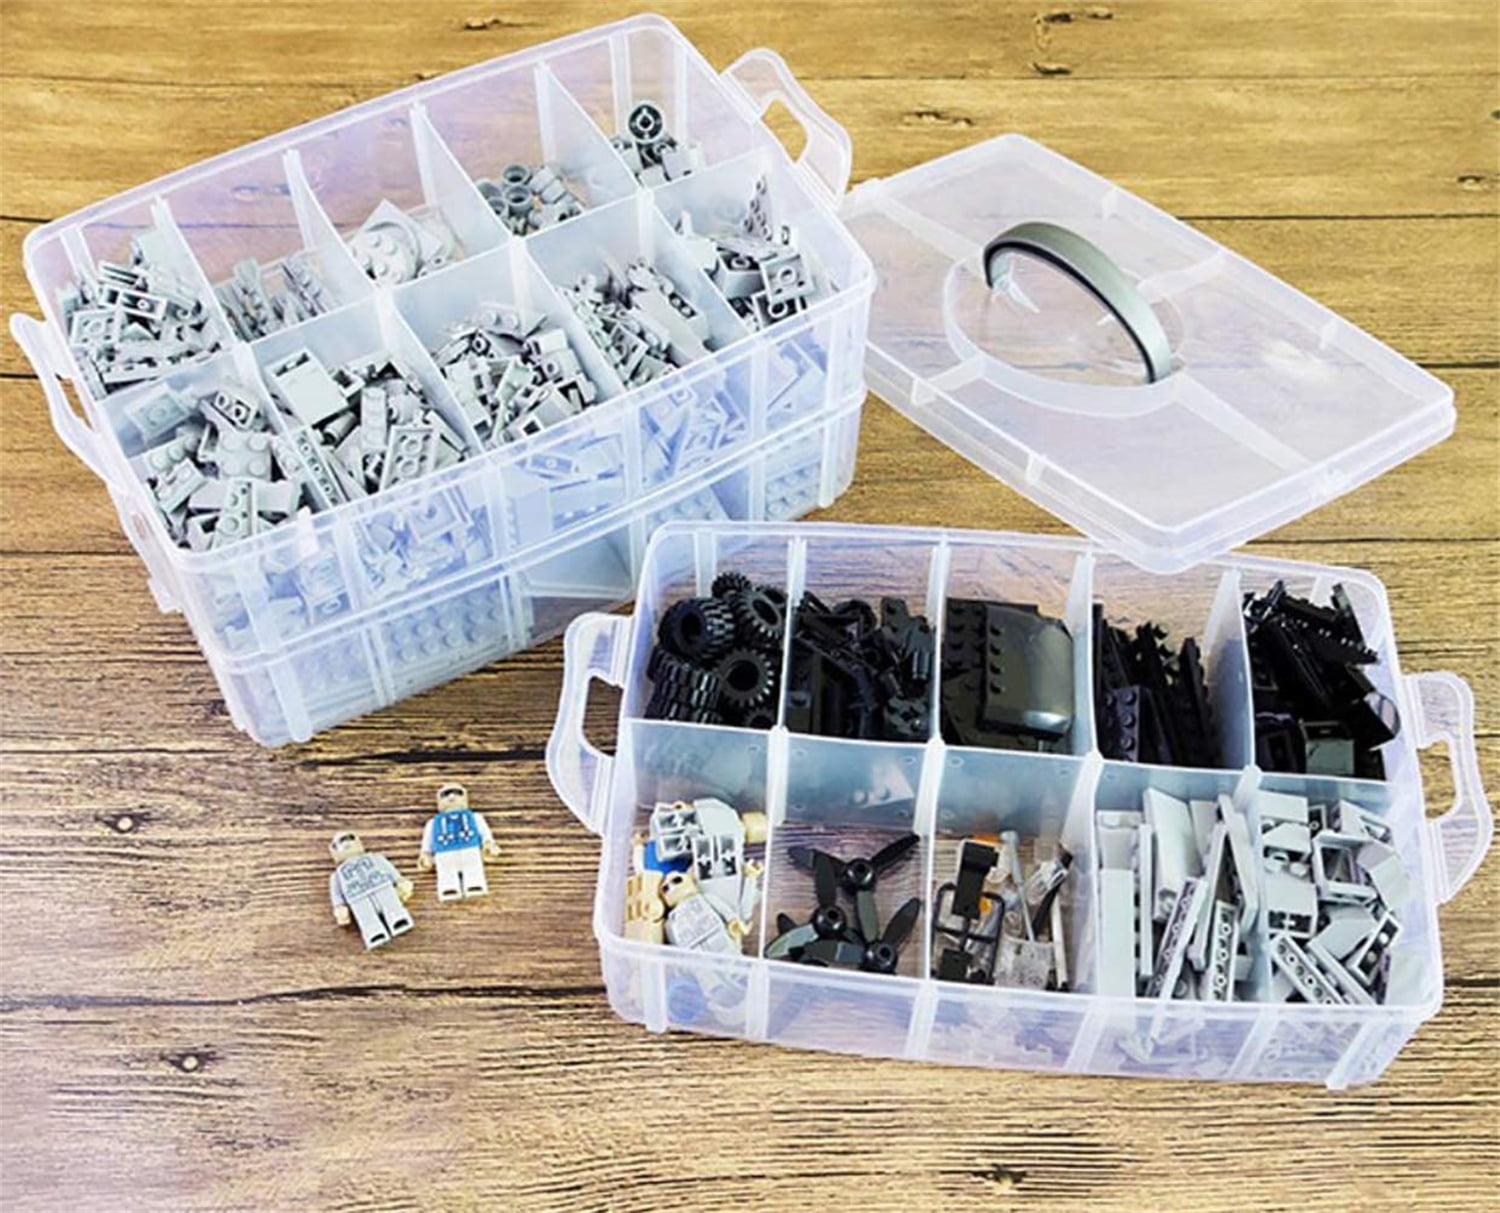 Superb Quality craft organizer box With Luring Discounts 